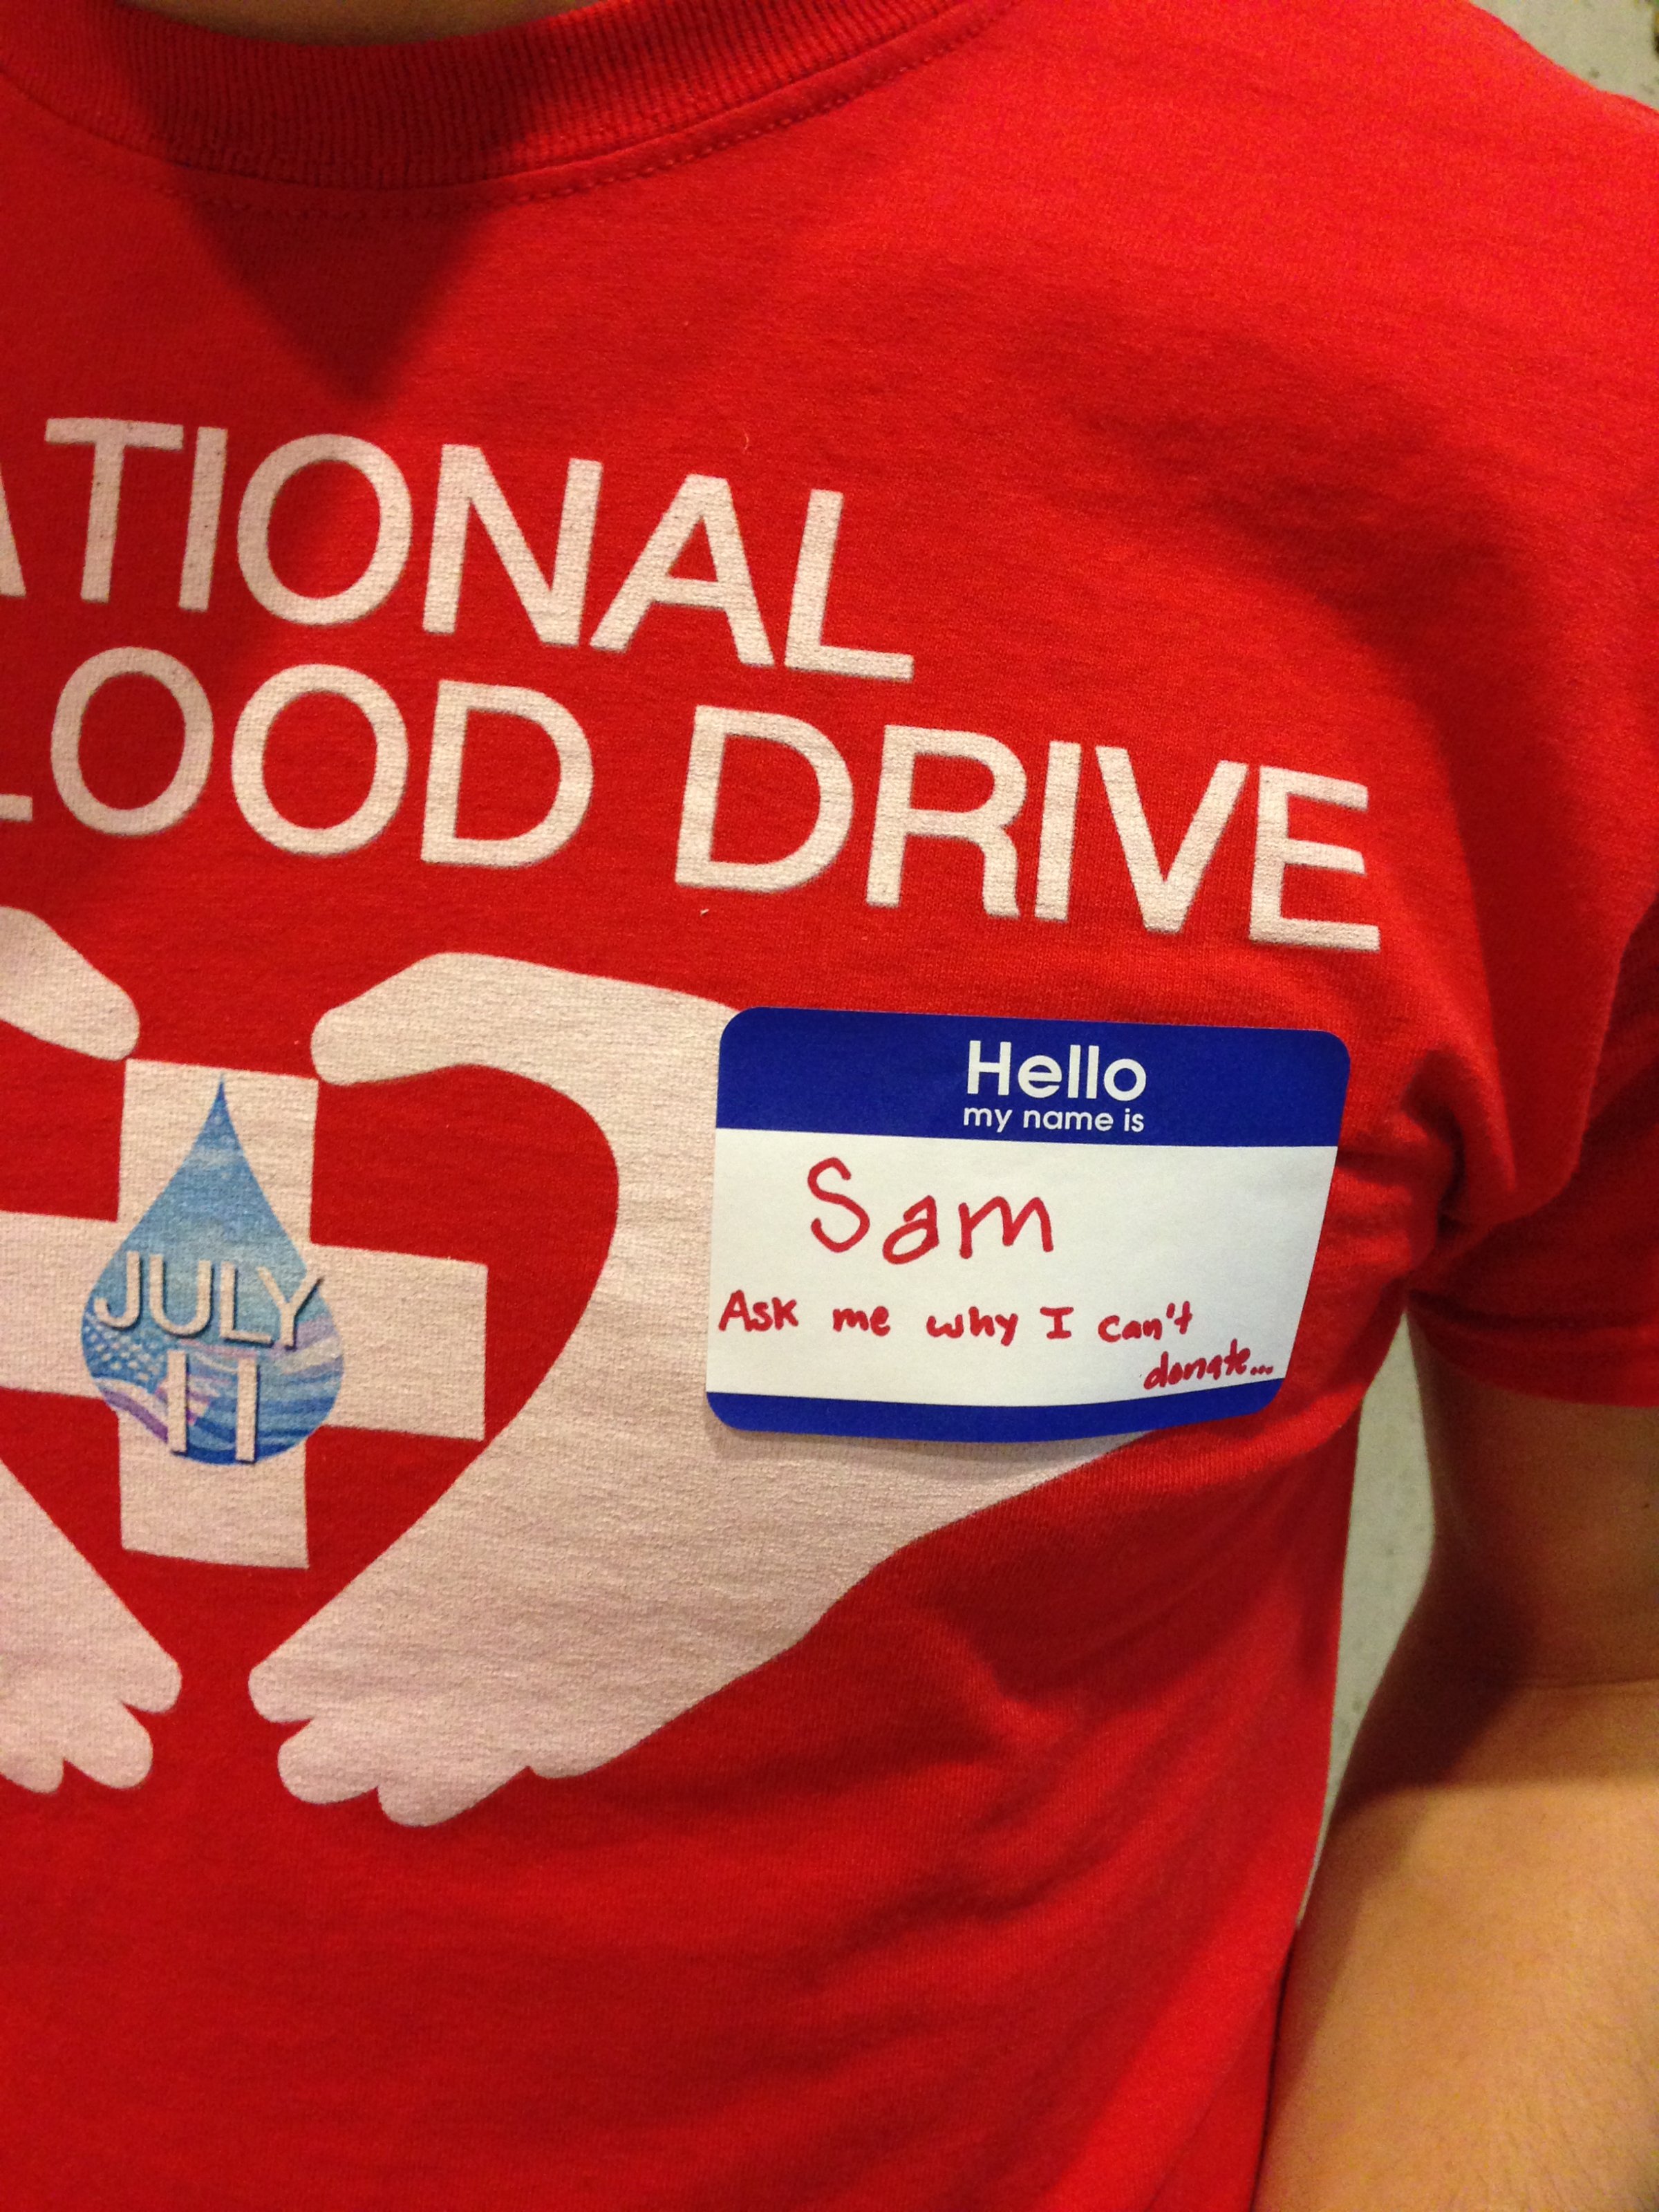 The National Gay Blood Drive is happening in 63 cities nationwide